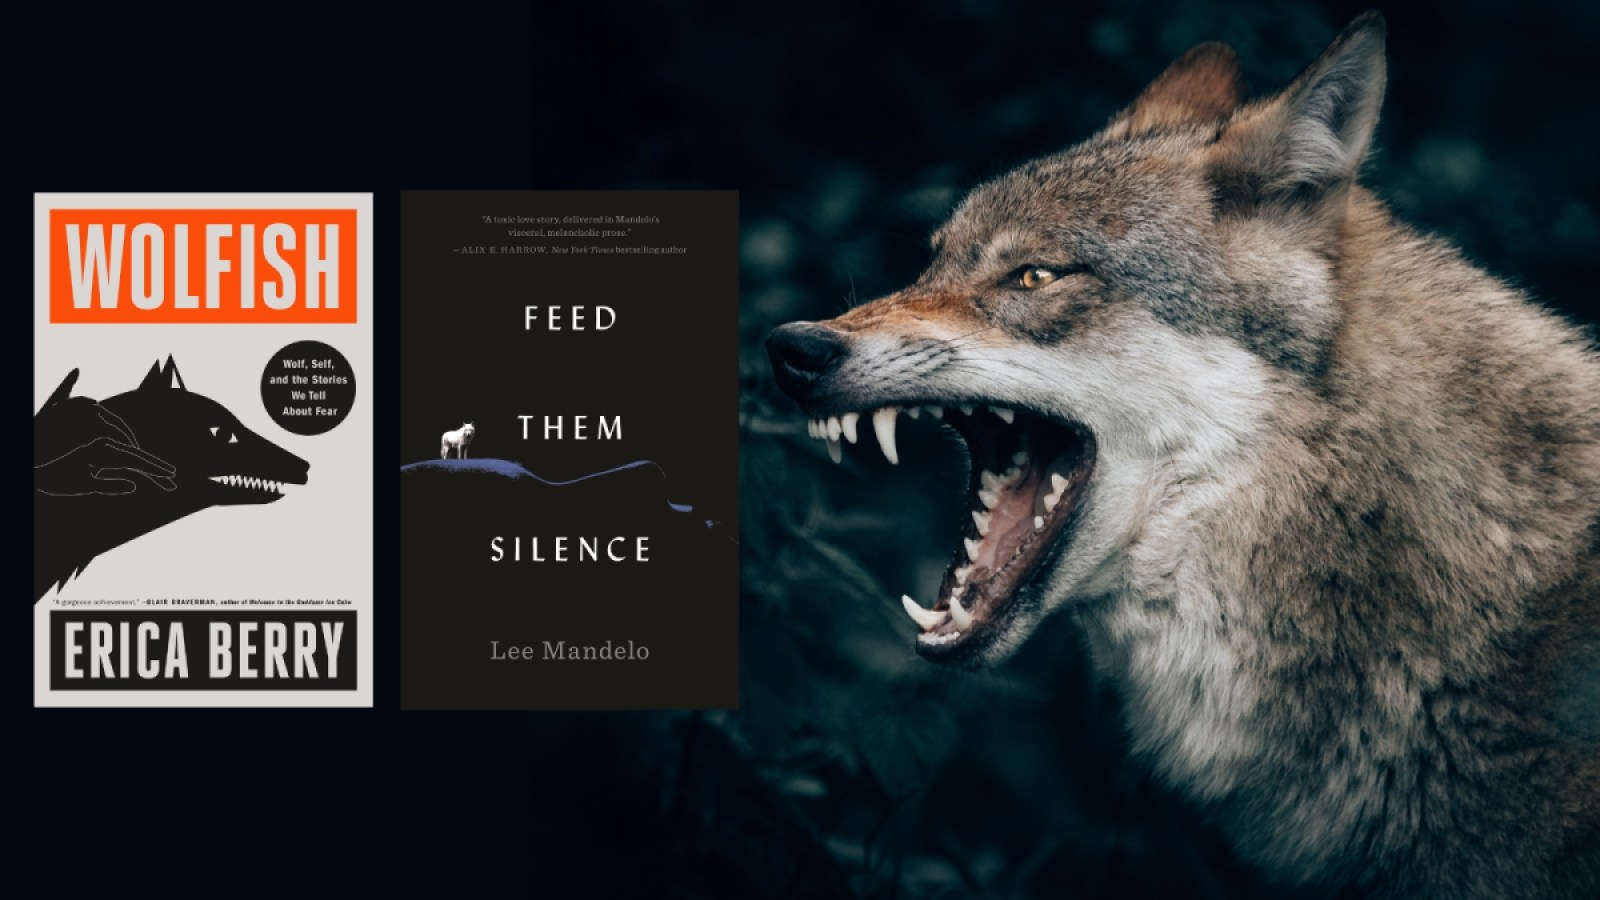 The Wolfish and Feed Them Silence book covers sit next to a photo of a wolf growling